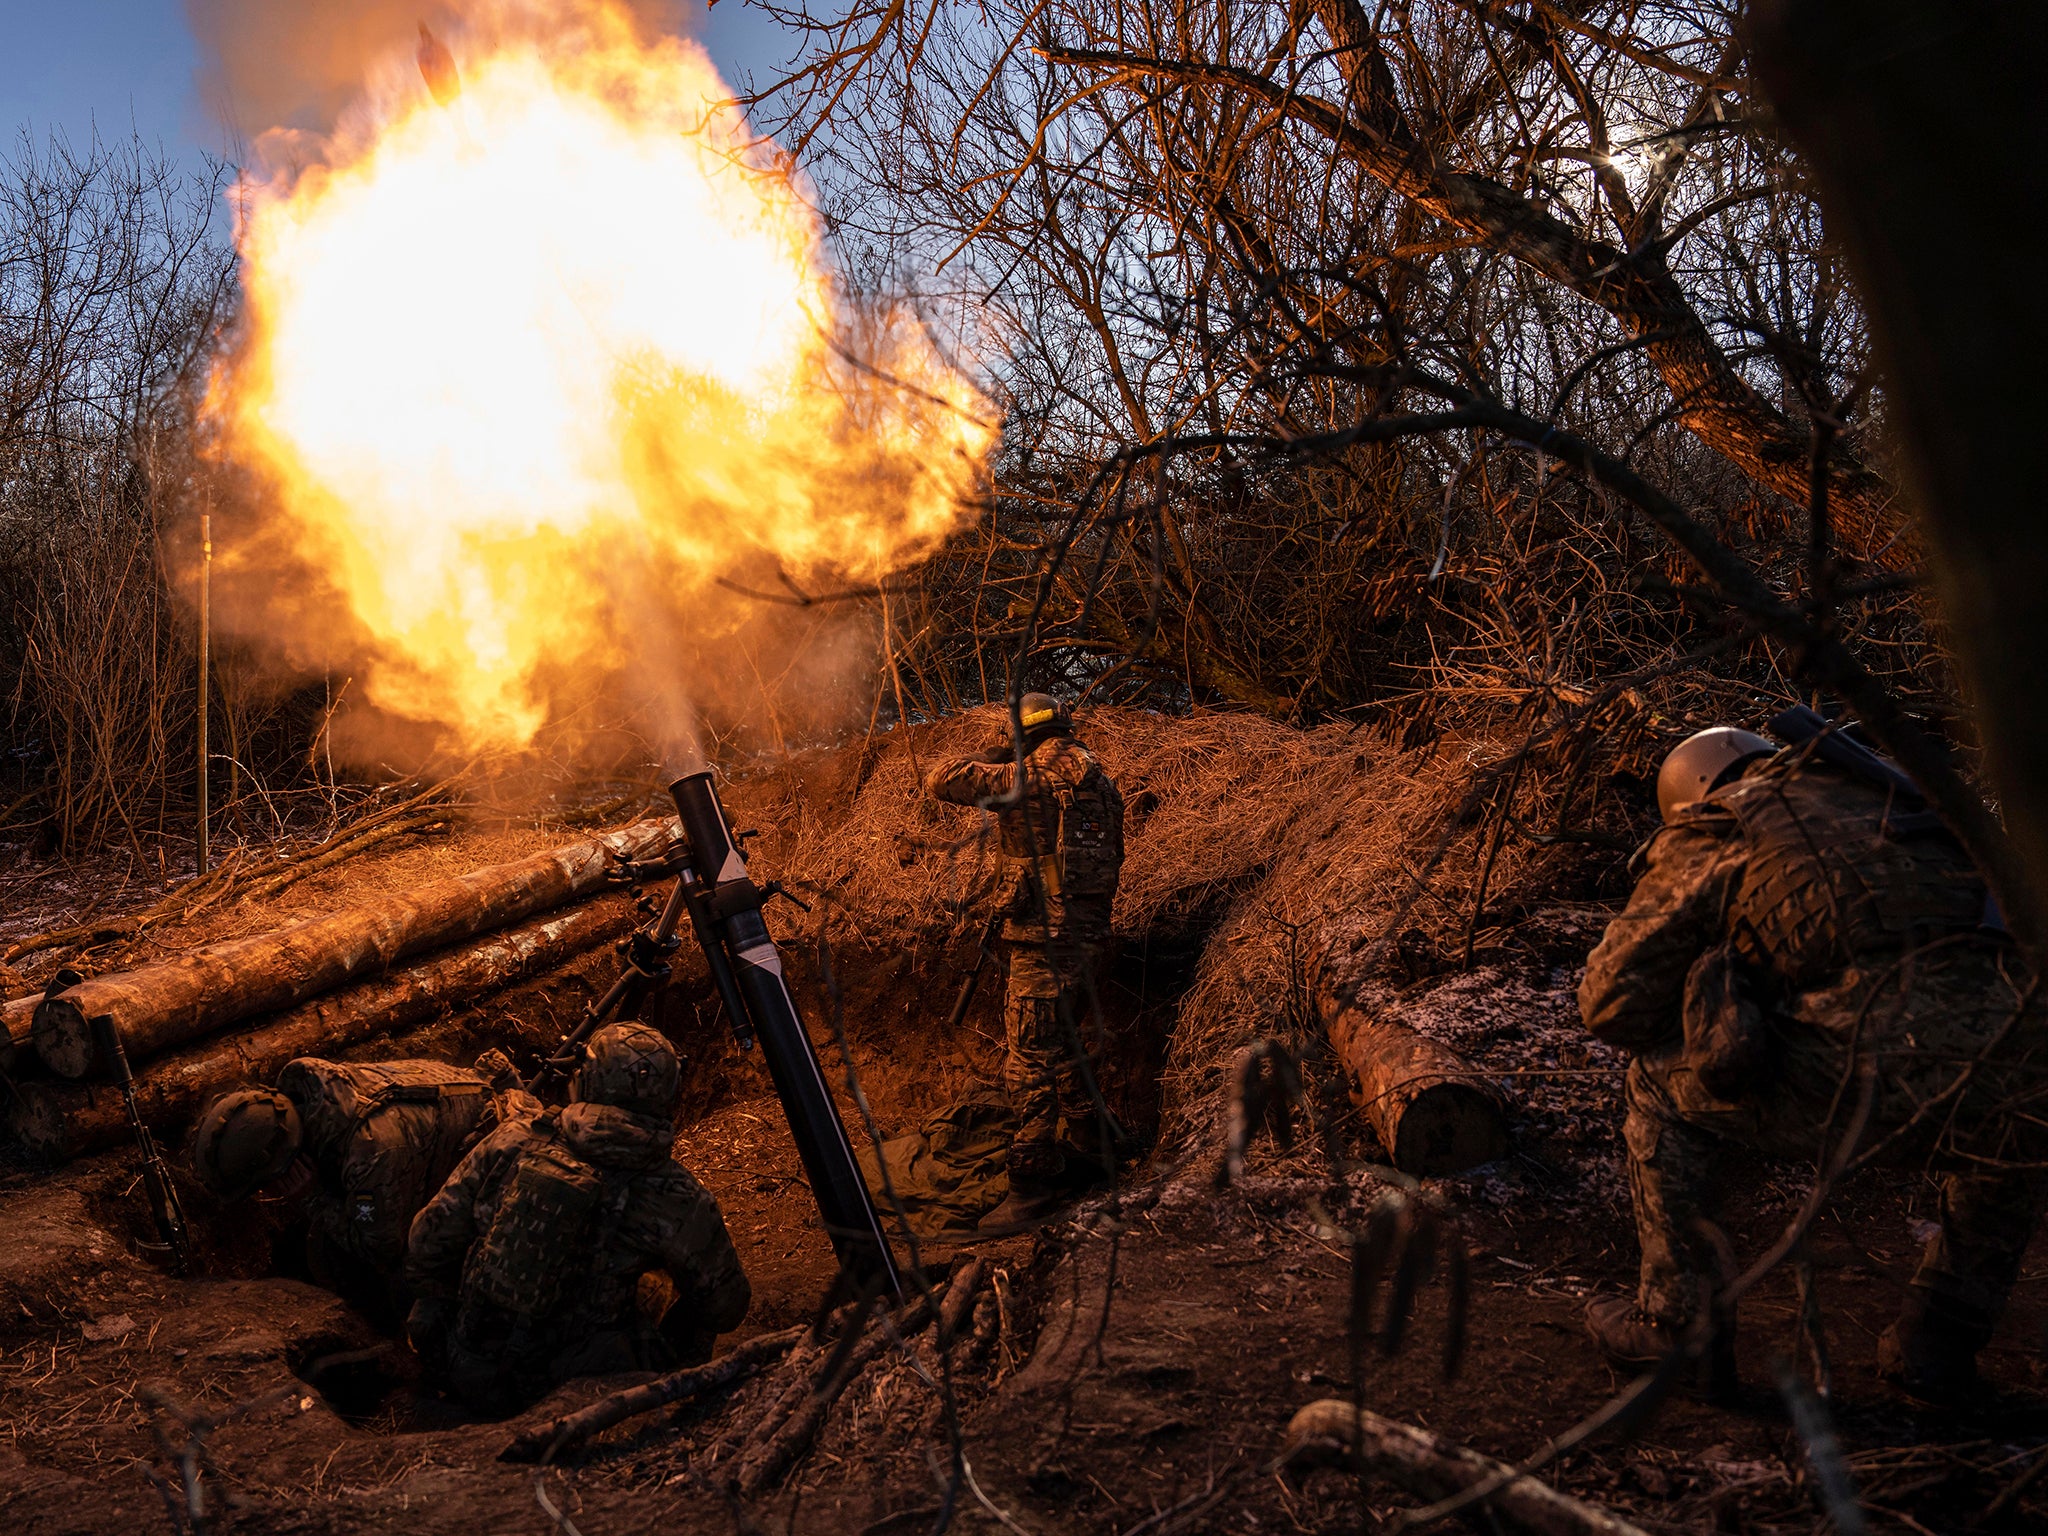 There has been fierce fighting between Ukrainian and Russian forces across eastern Ukraine since the start of the invasion